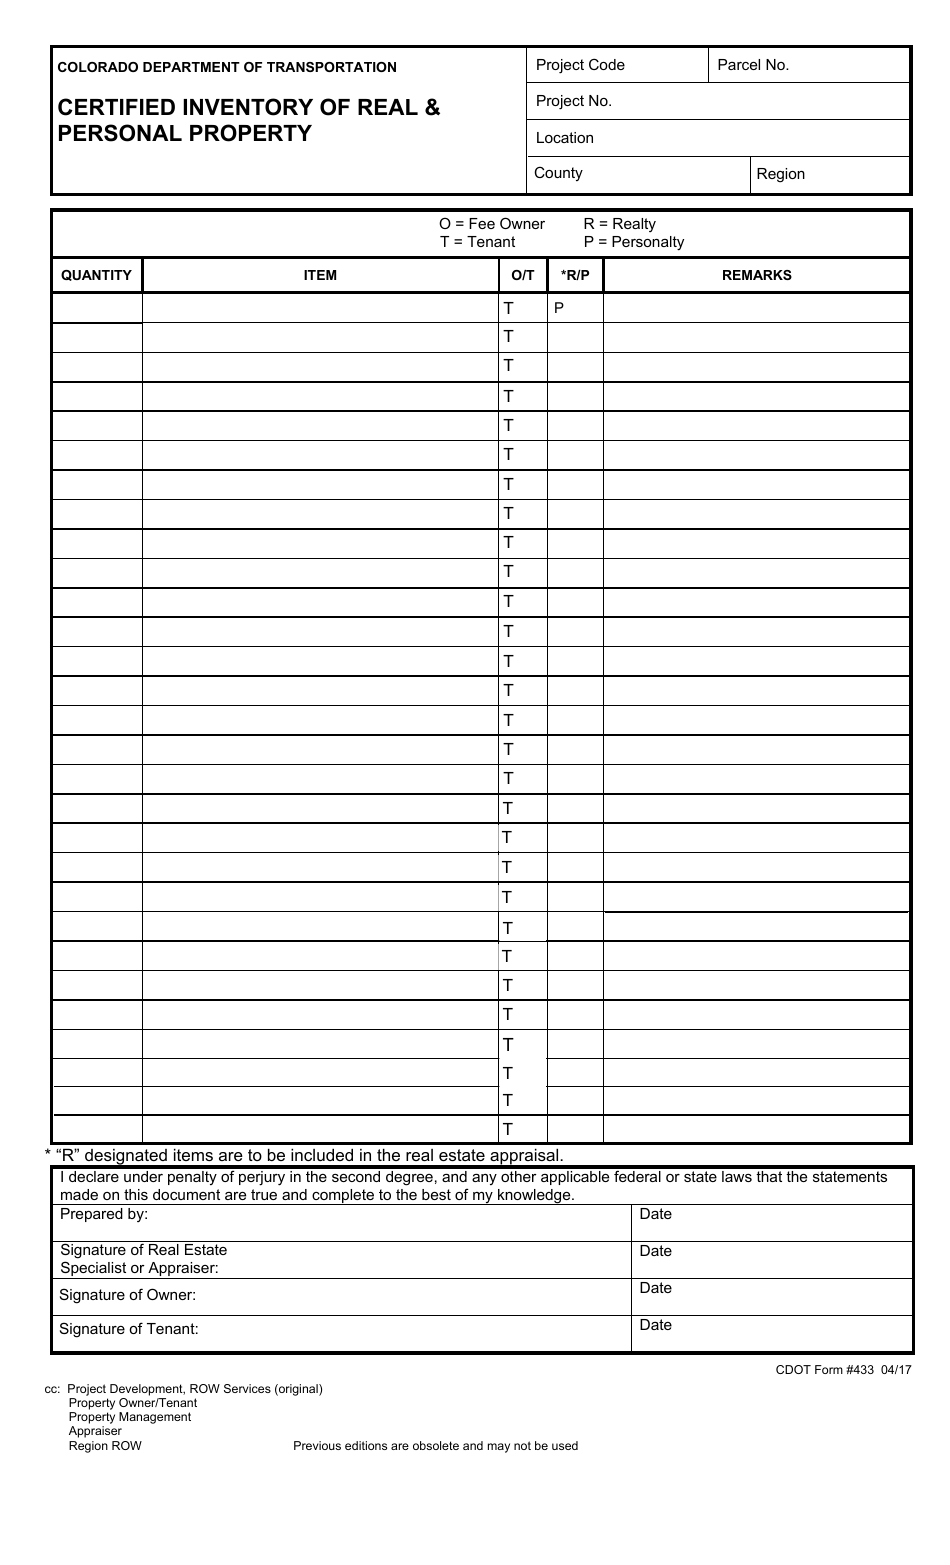 CDOT Form 433 Certified Inventory of Real  Personal Property - Colorado, Page 1